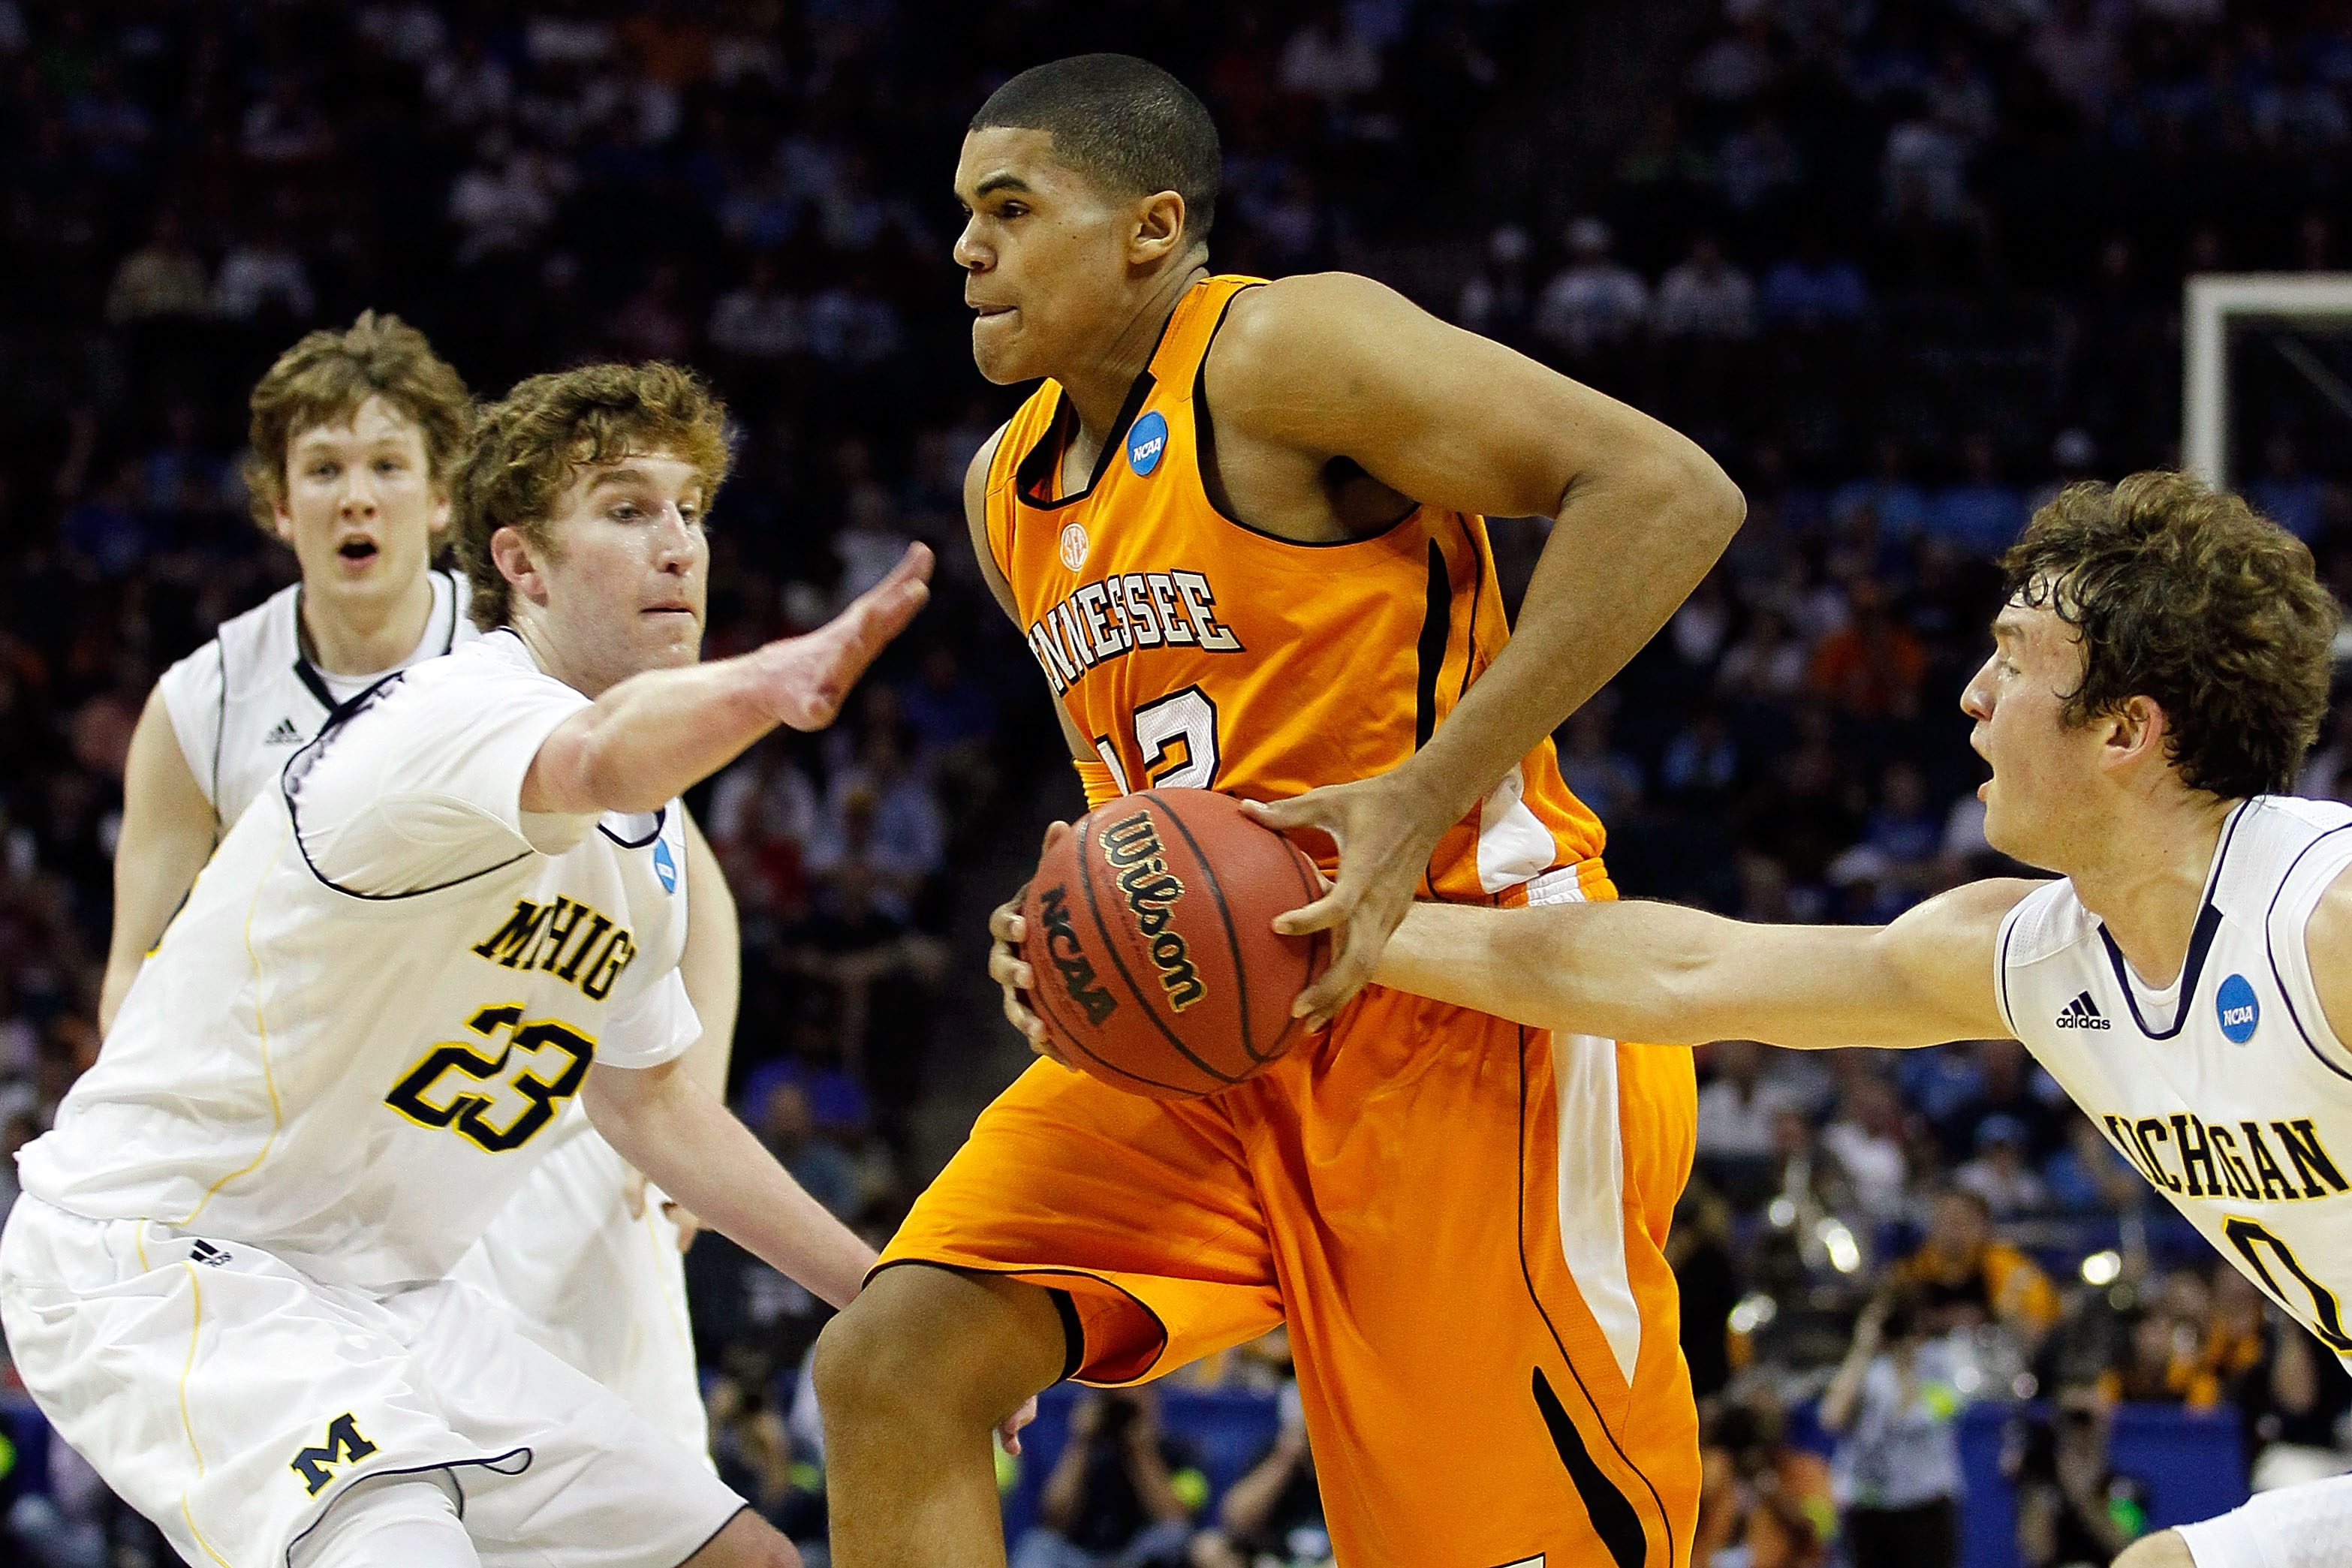 CHARLOTTE, NC - MARCH 18:  Tobias Harris #12 of the Tennessee Volunteers drives through Evan Smotrycz #23 and Zack Novak #0 of the Michigan Wolverines in the first half during the second round of the 2011 NCAA men's basketball tournament at Time Warner Ca